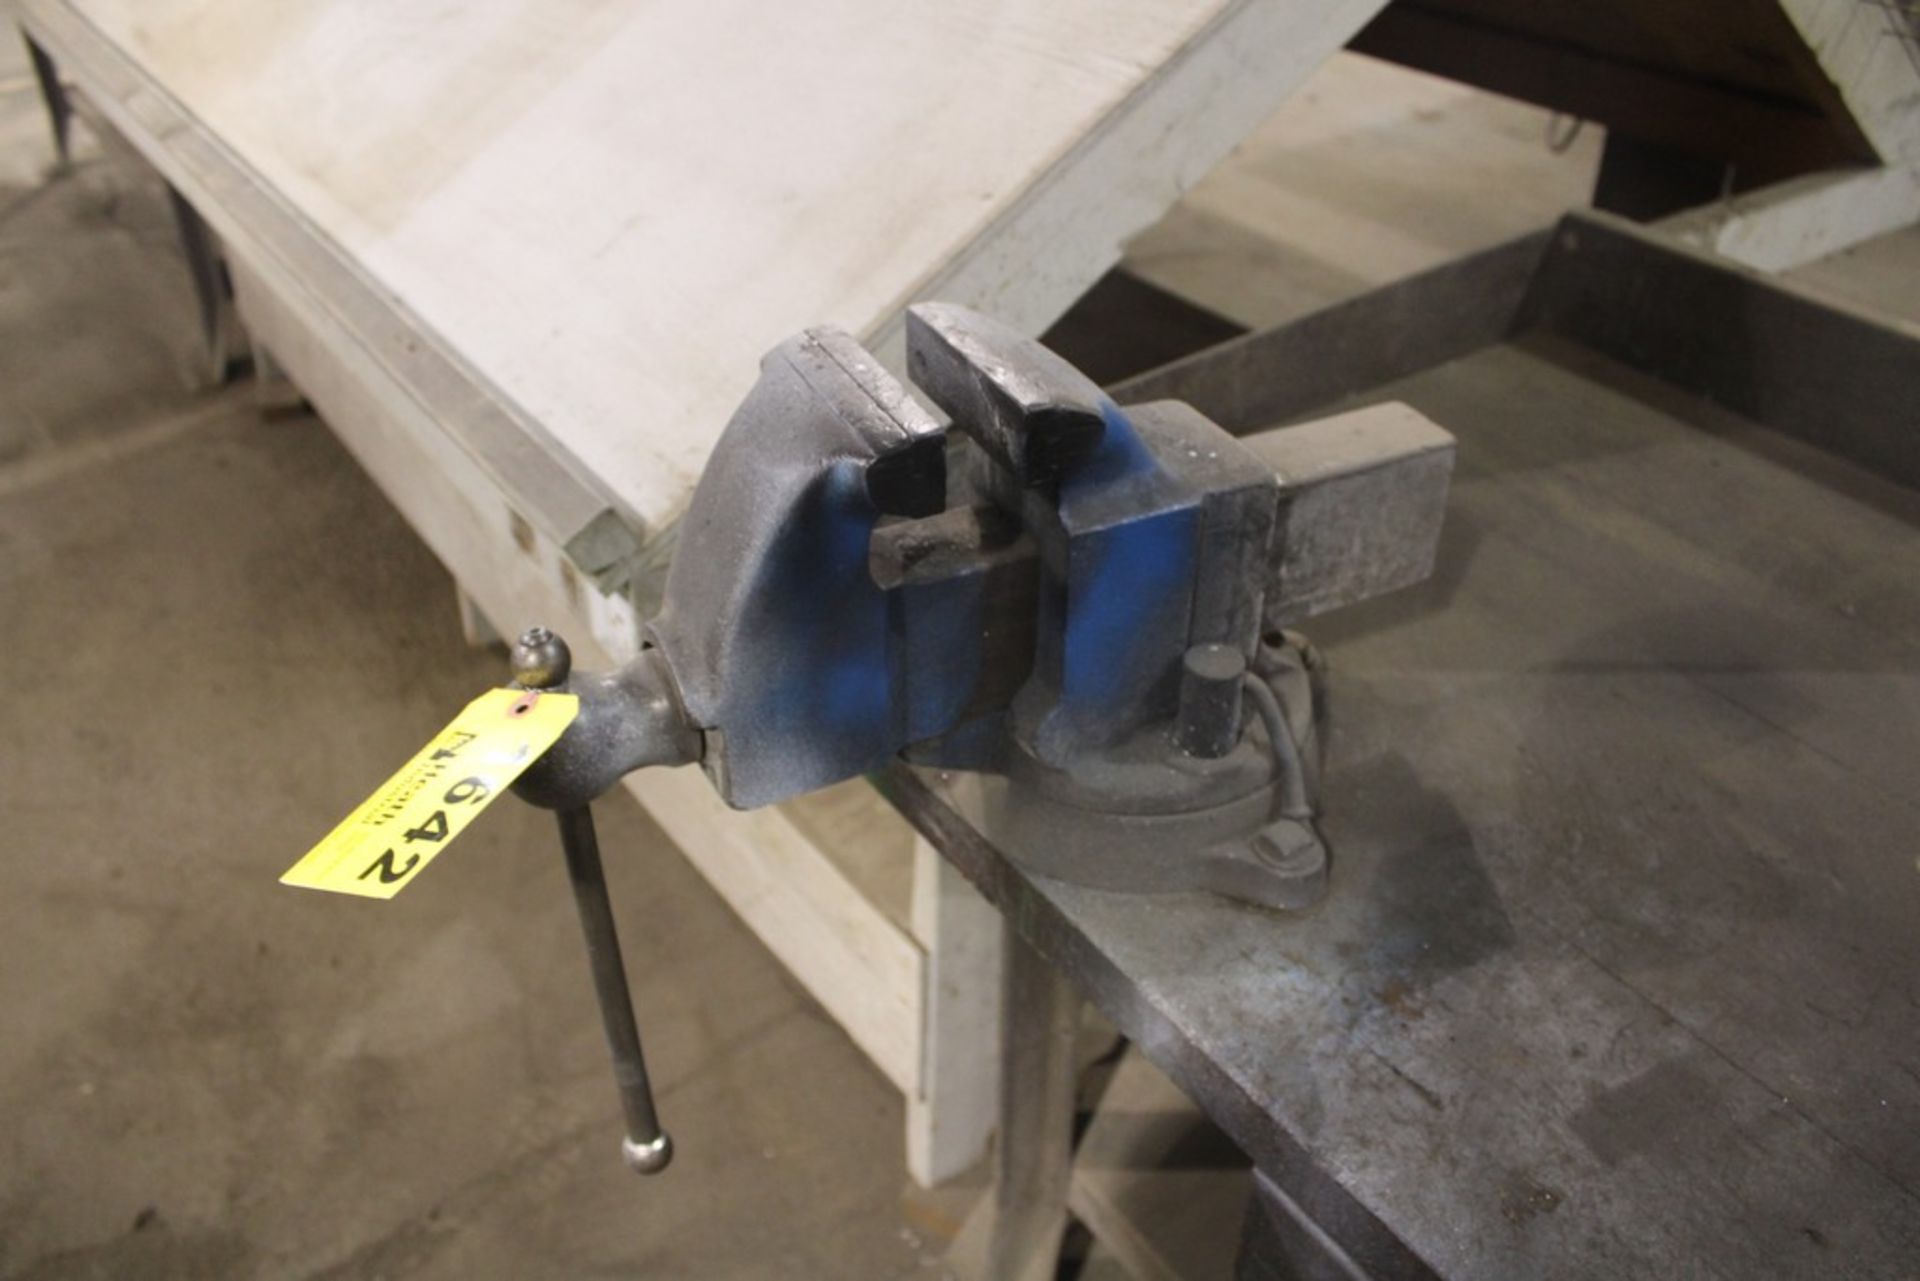 4-1/2" VISE MOUNTED MOUNTED ON STEEL FRAME WORK BENCH, 72" X 30" X 34" - Image 2 of 2